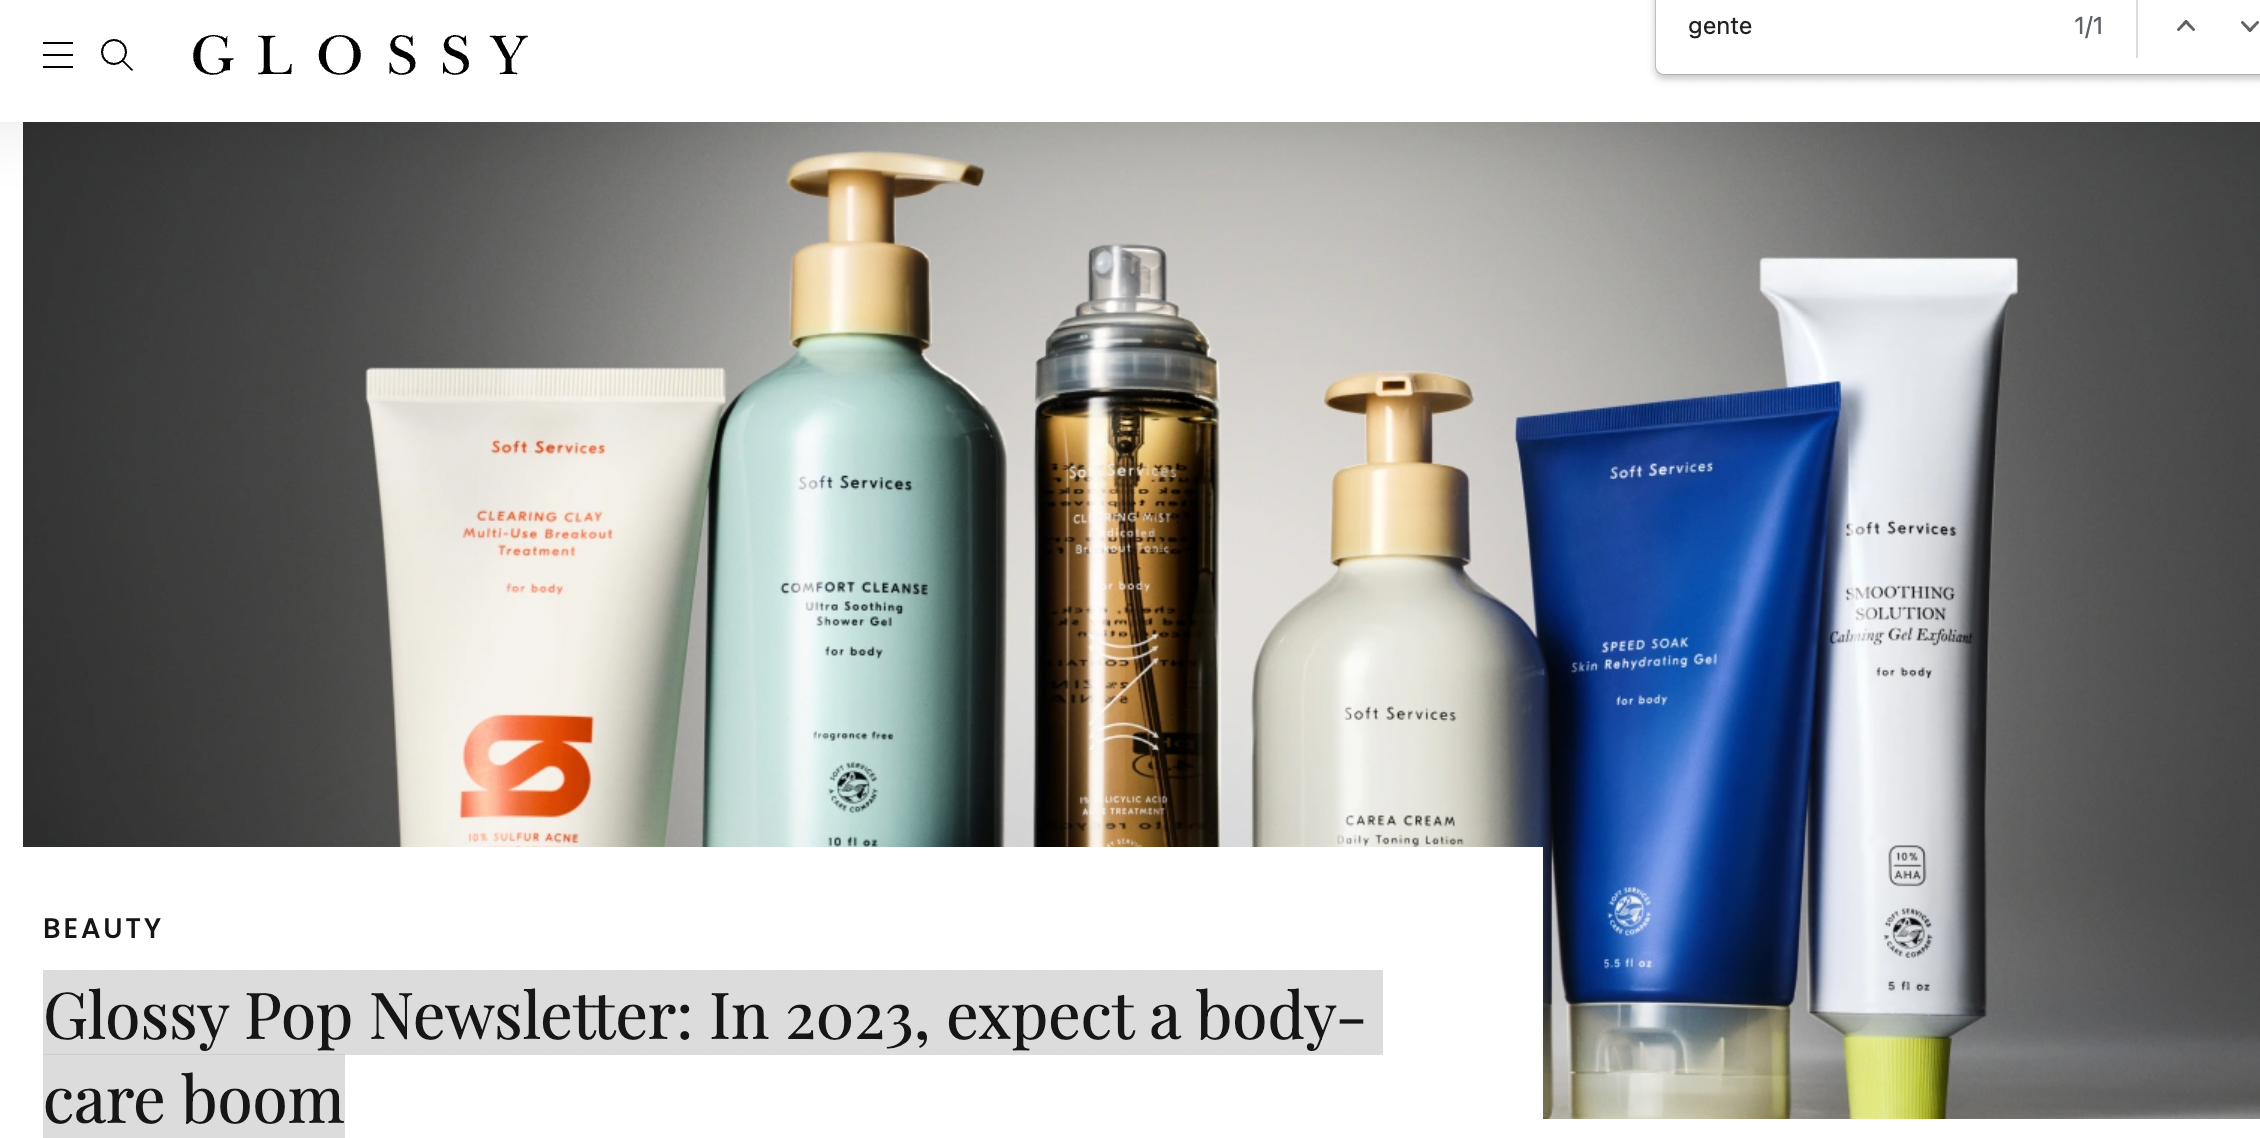 Glossy: Glossy Pop Newsletter: In 2023, expect a body-care boom